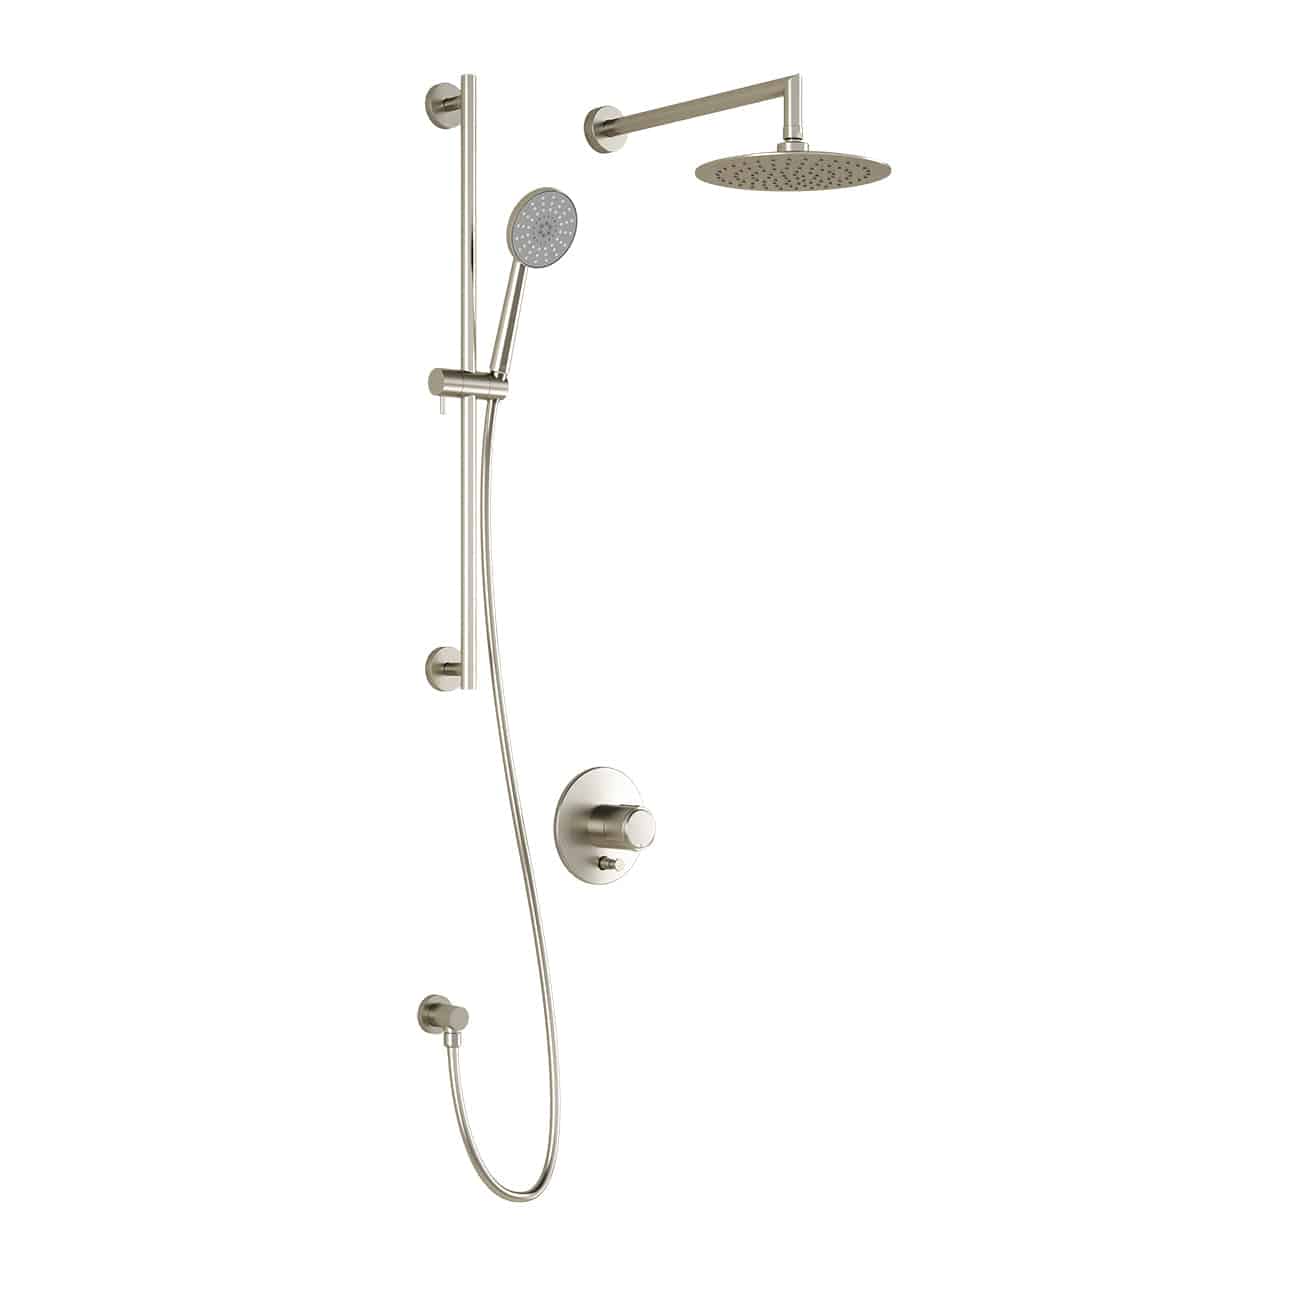 Kalia CITÉ PB4 (Valve Not Included) Pressure Balance Shower System With Round Shower Head and Hand Shower Brushed Nickel PVD